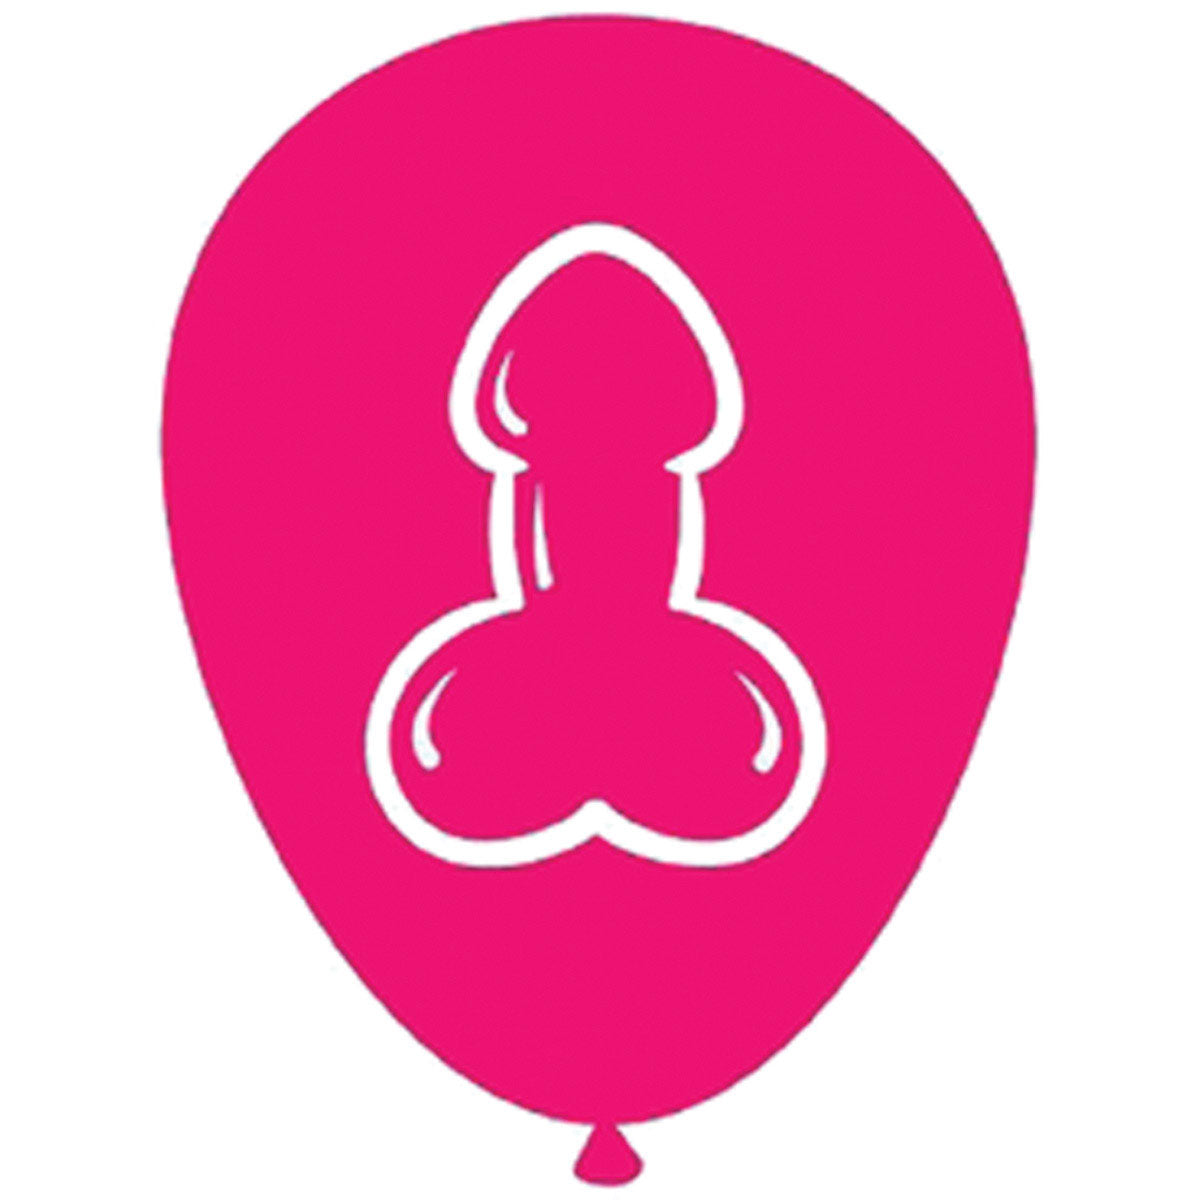 Candyprints Super Fun Penis Balloons - 8 pack